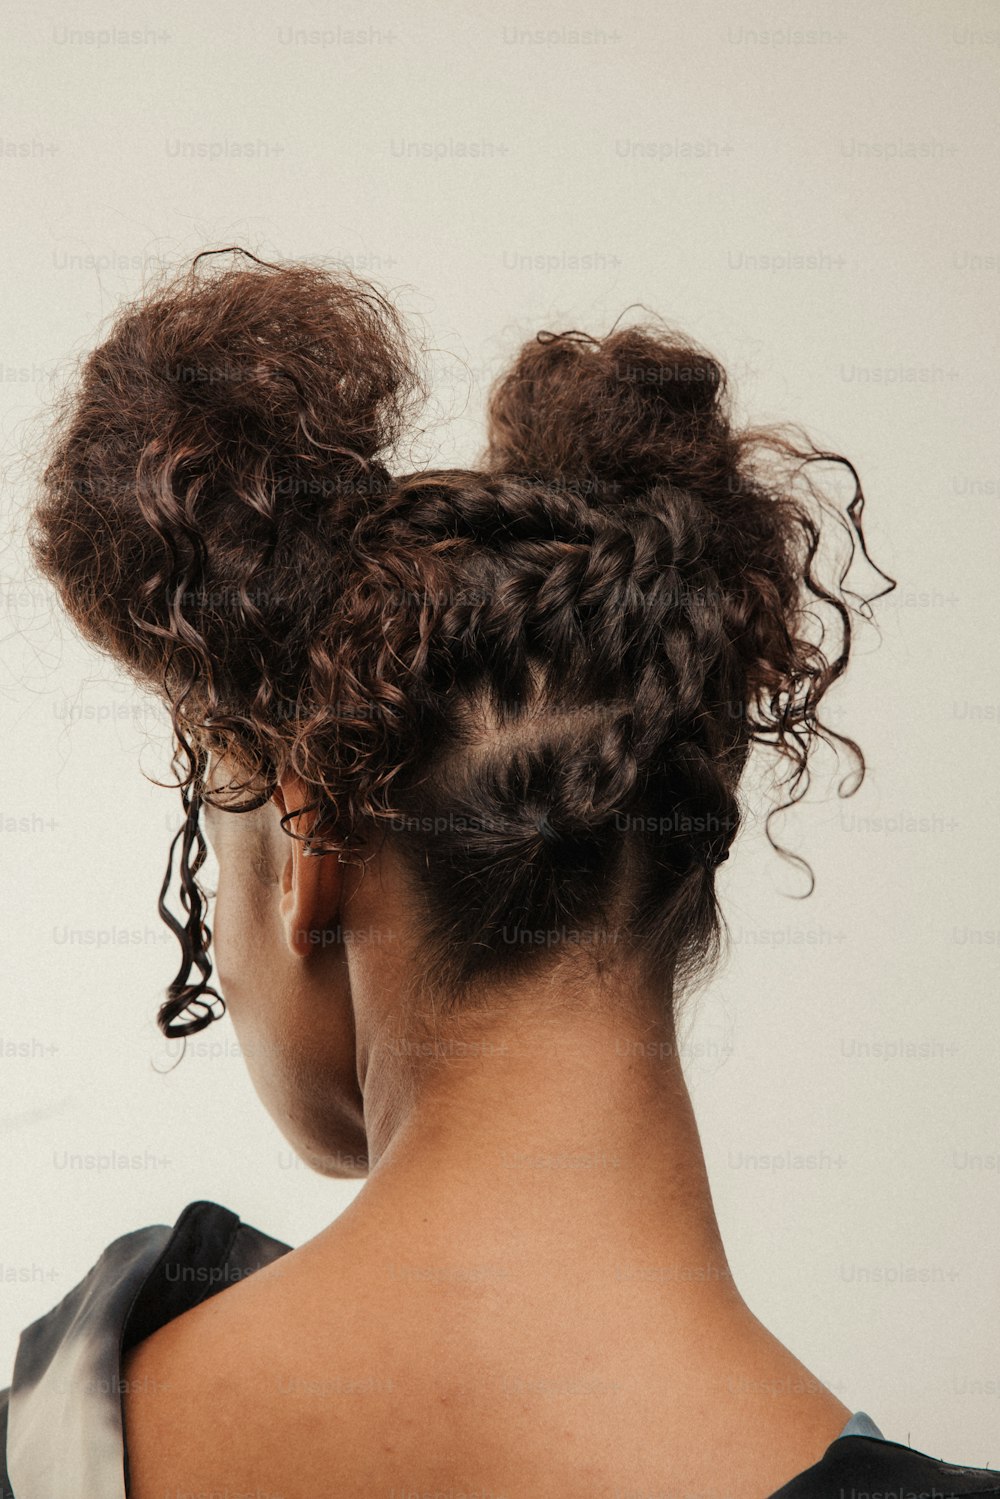 the back of a woman's head with curly hair